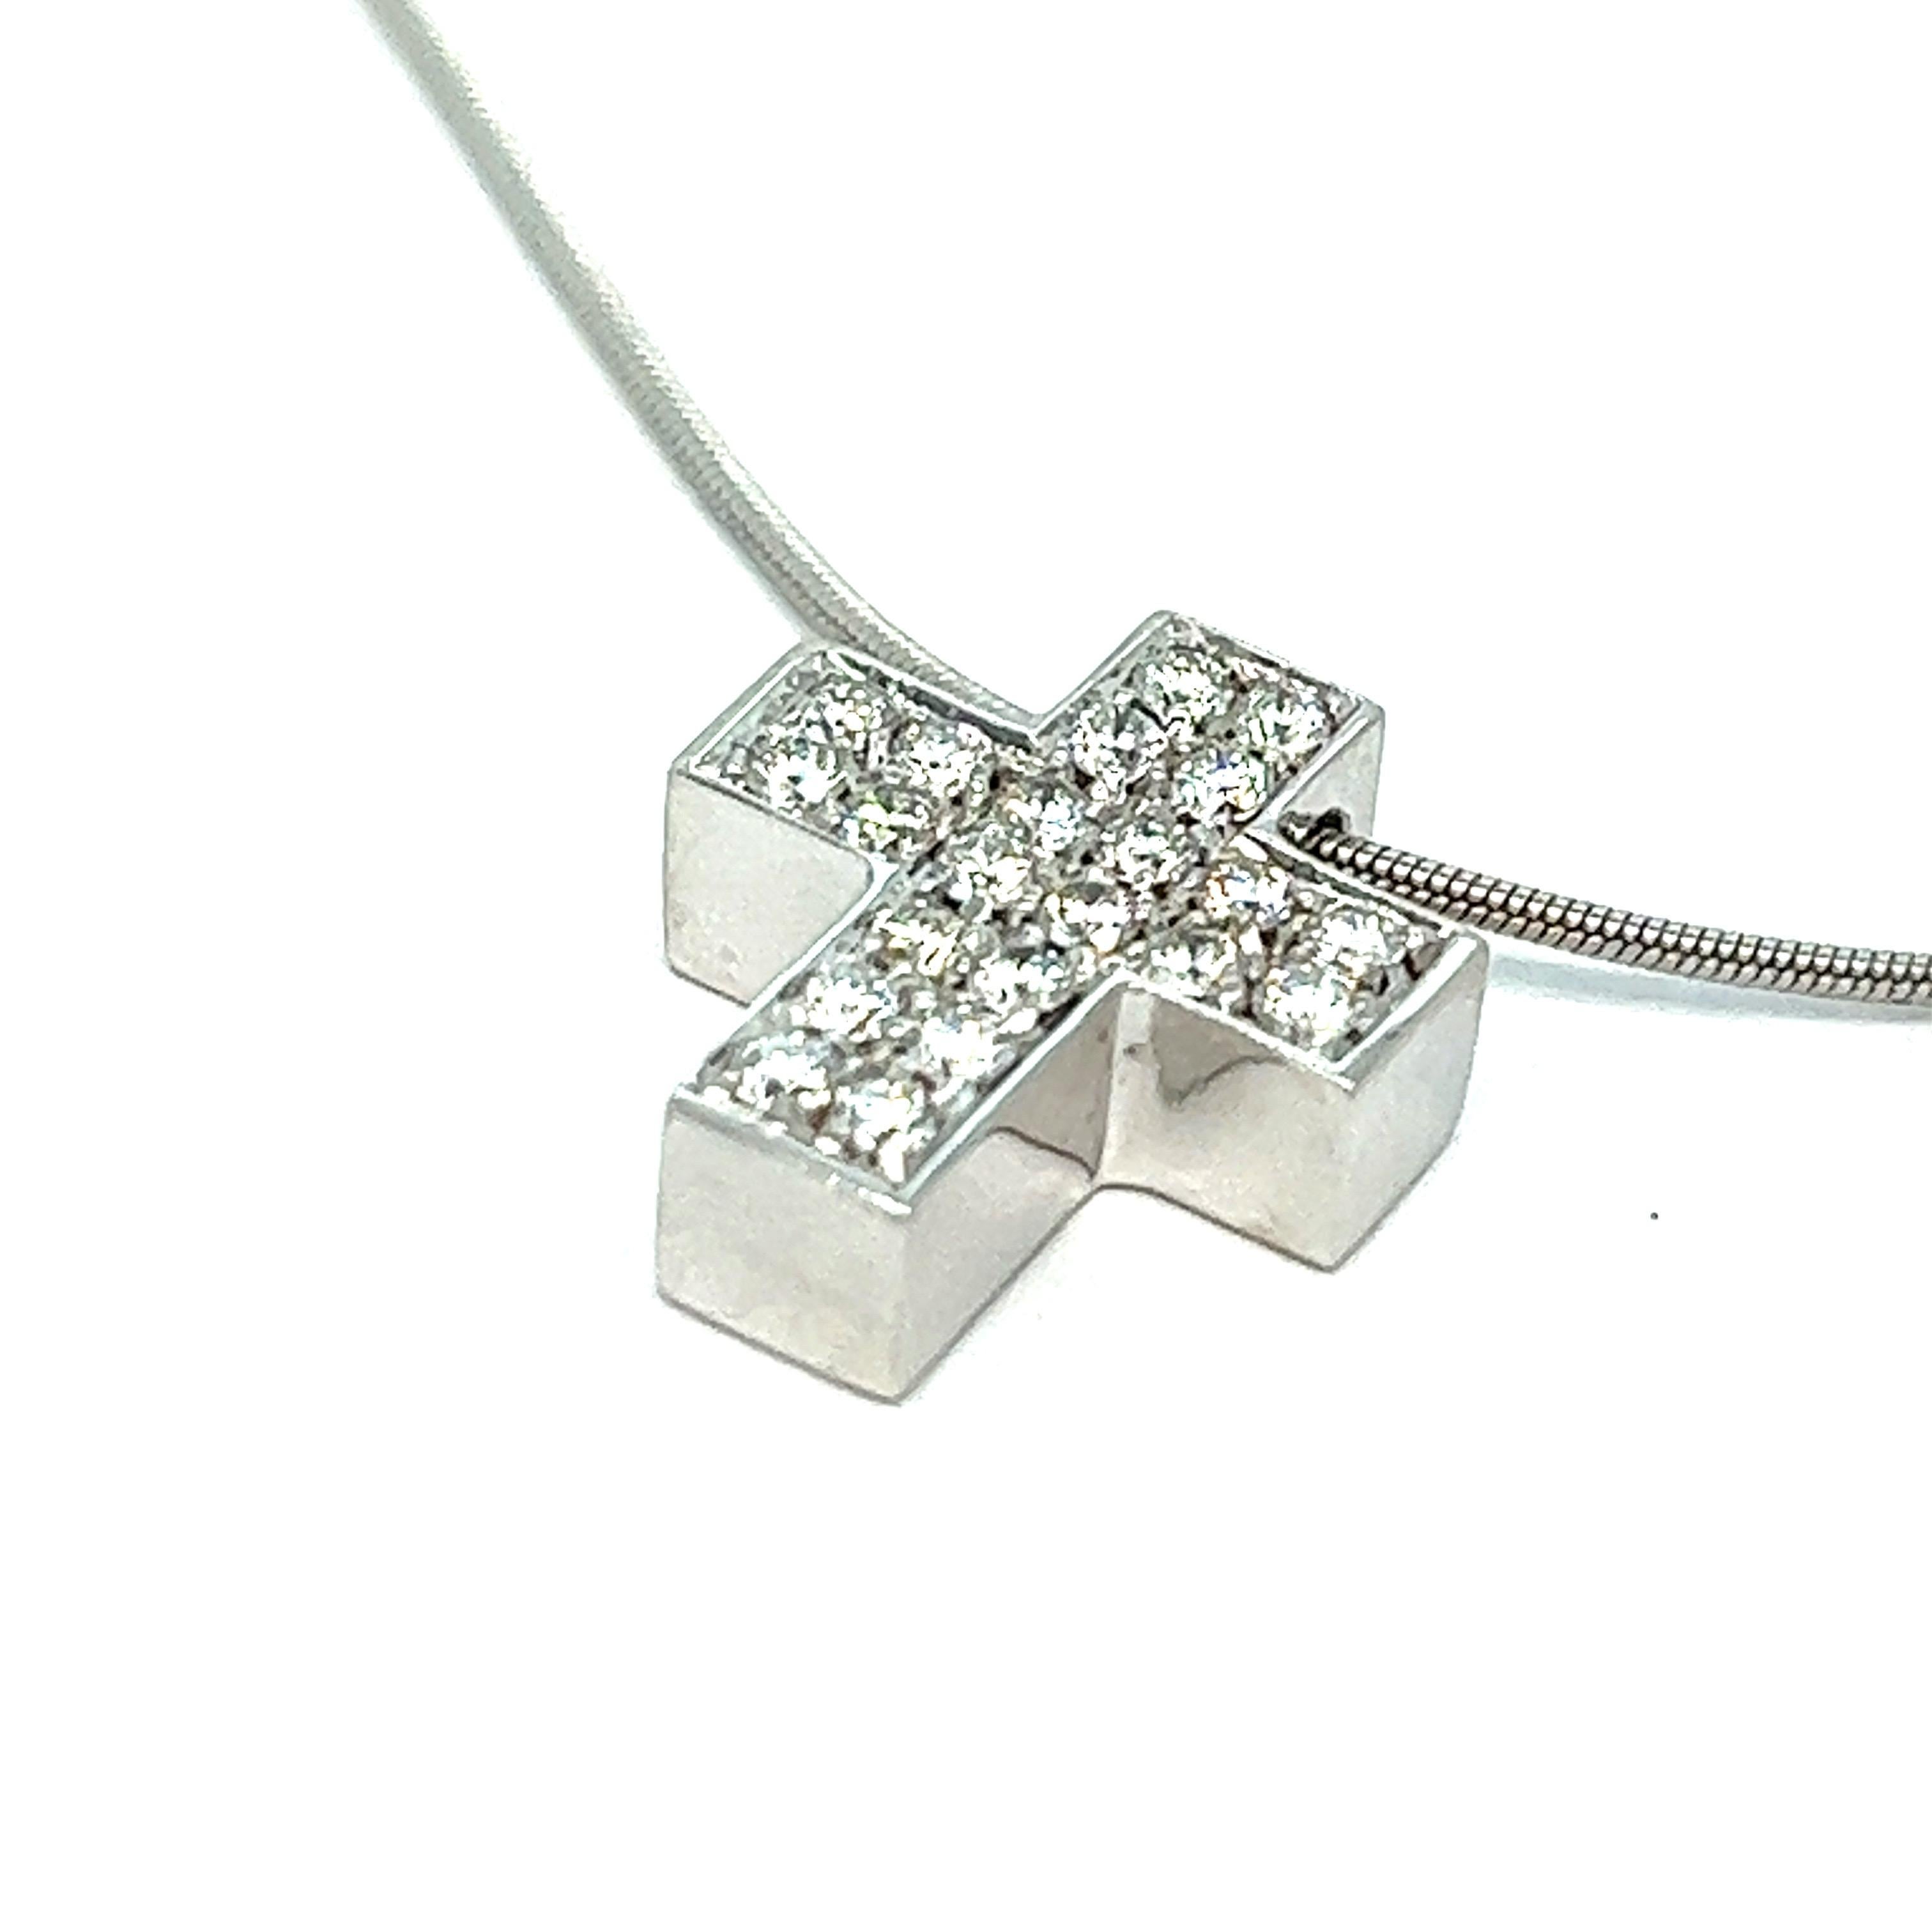 Diamond cross pendant necklace, made in Italy

Round-cut diamonds of 0.70 carat, 18 karat white gold; marked 750

Size: pendant width 1.2 cm, length 1.4 cm; chain length 15.75 inches
Total weight: 6.5 grams